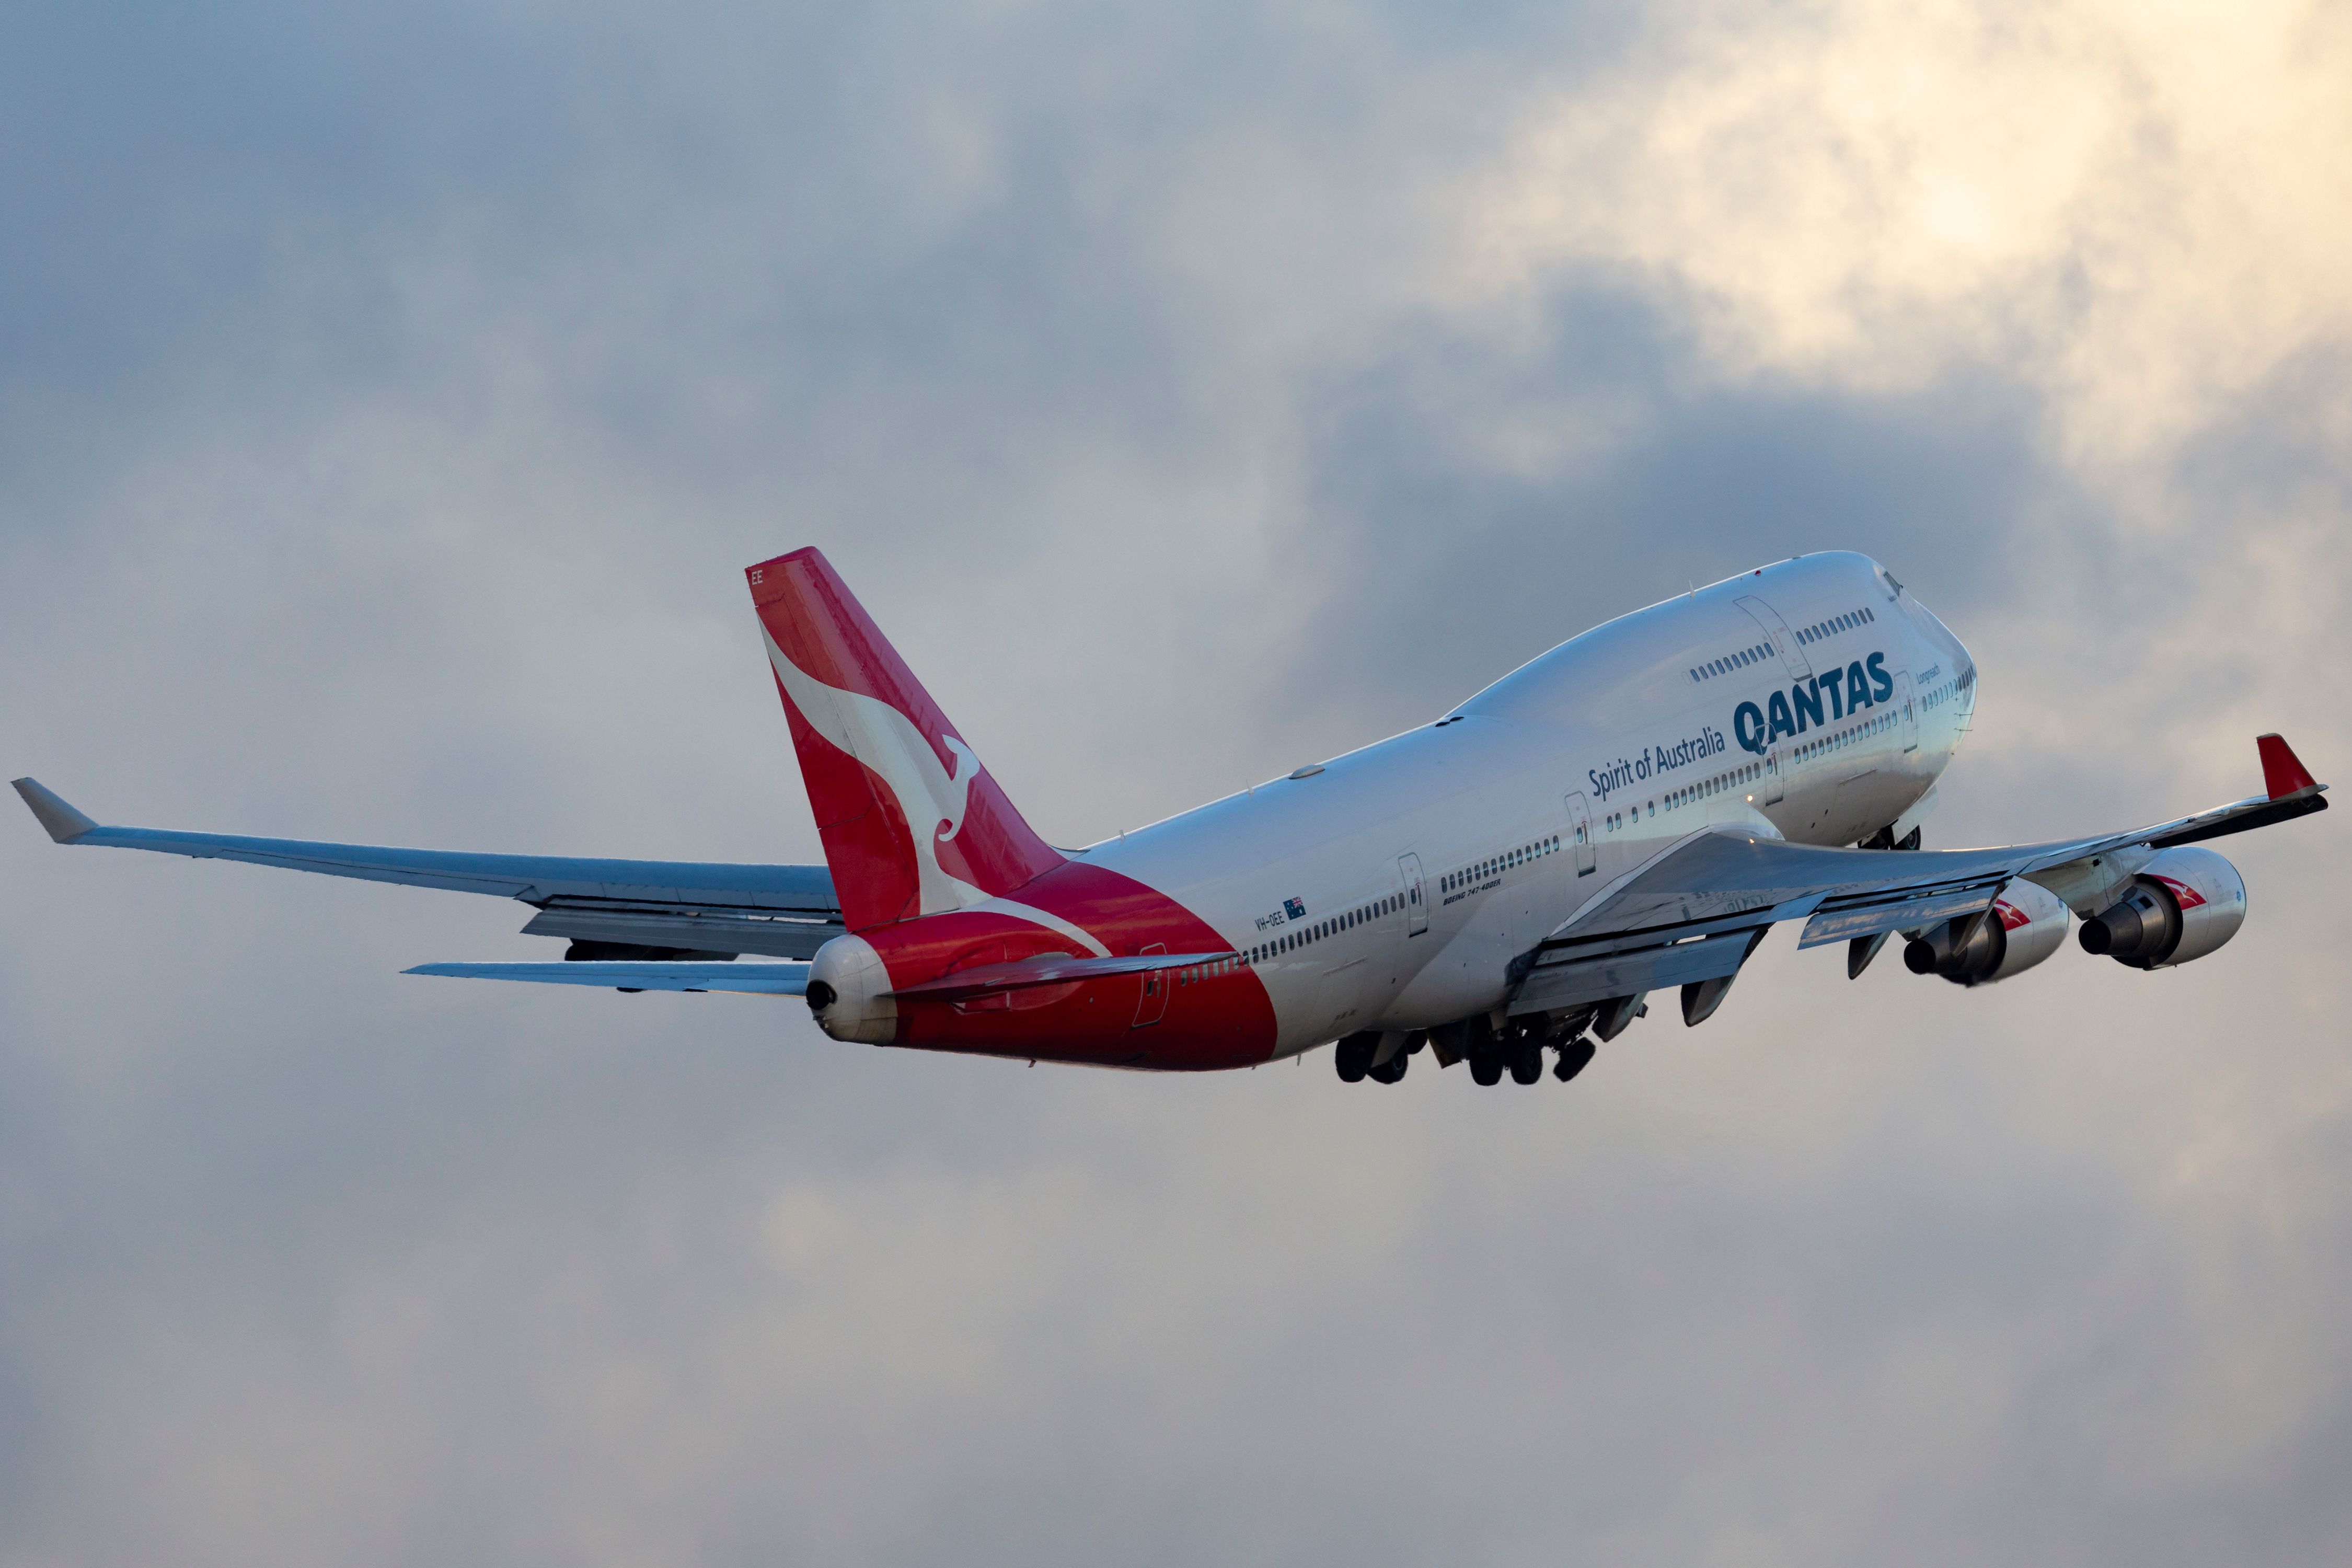 A Qantas Boeing 747 flying in the sky.